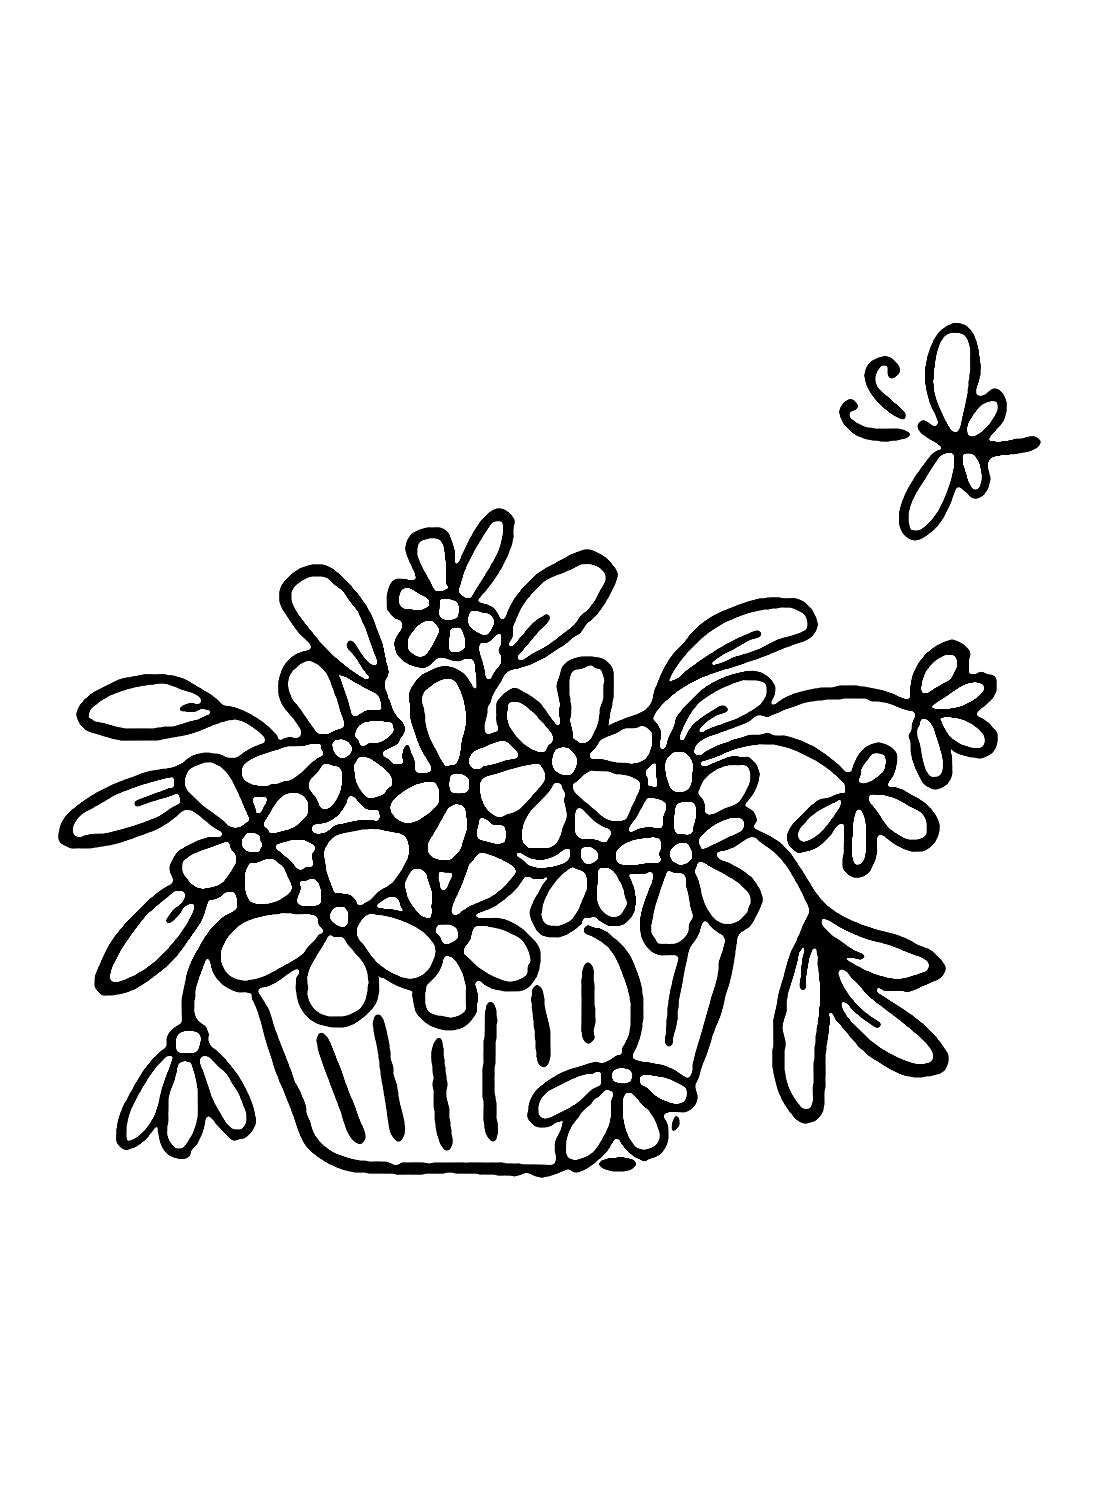 Images Flower Basket Coloring Page